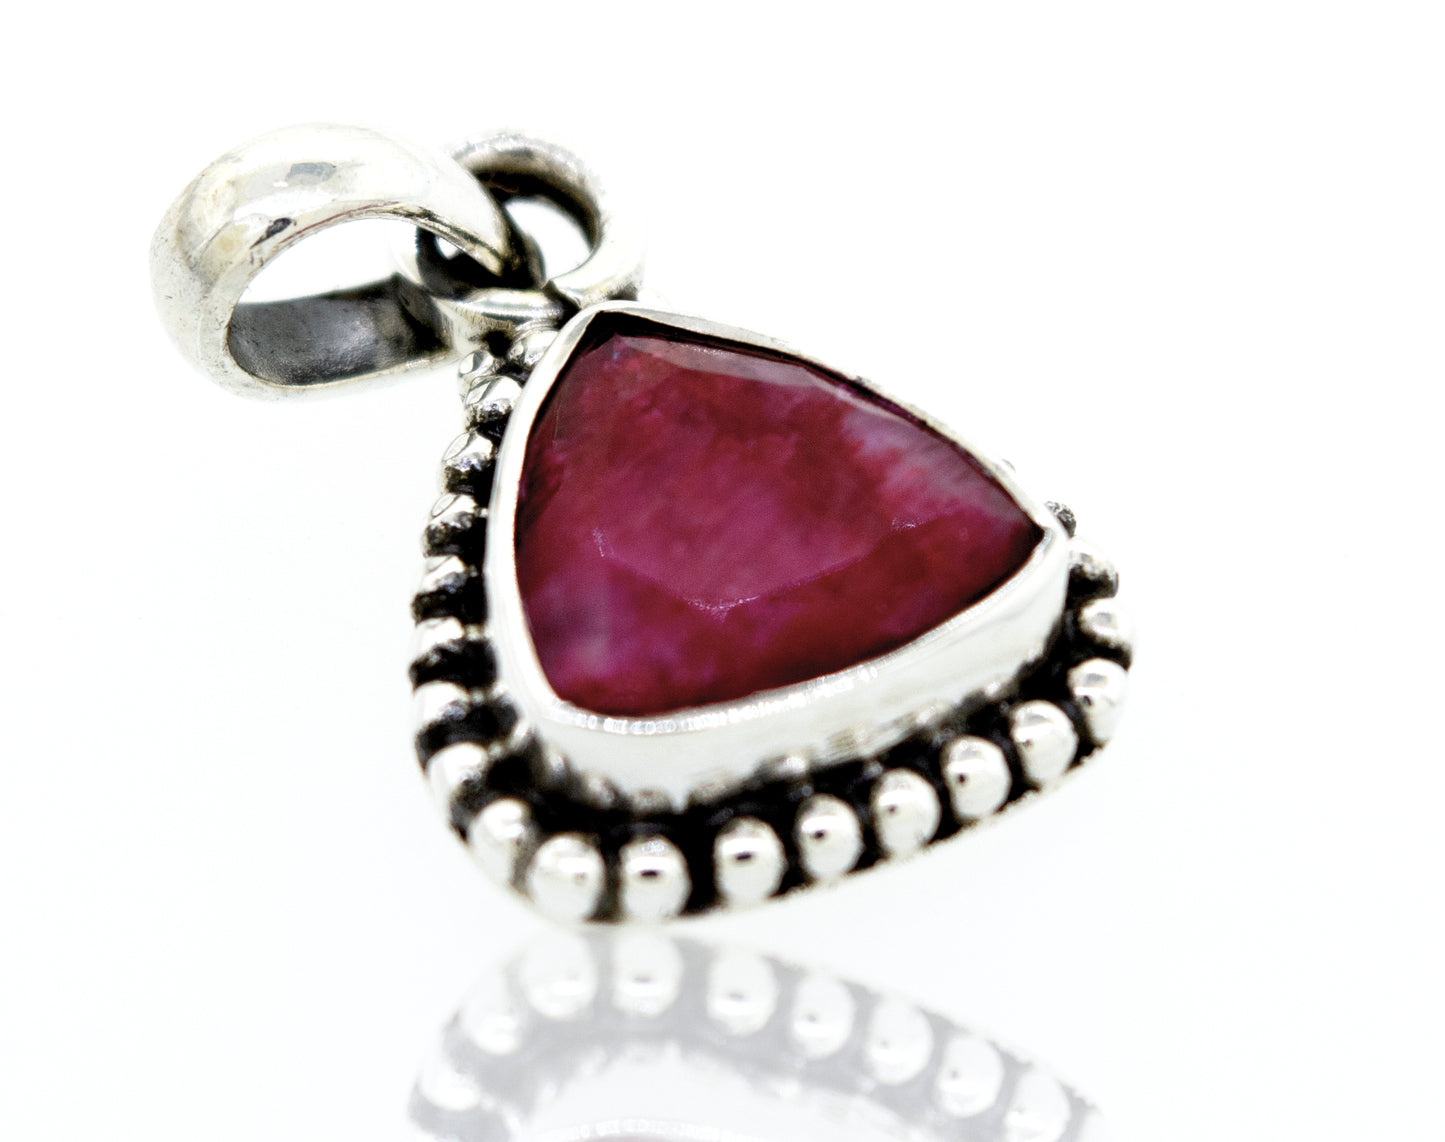 A Beautiful Triangular Shape Ruby Pendant With Beads Design by Super Silver.